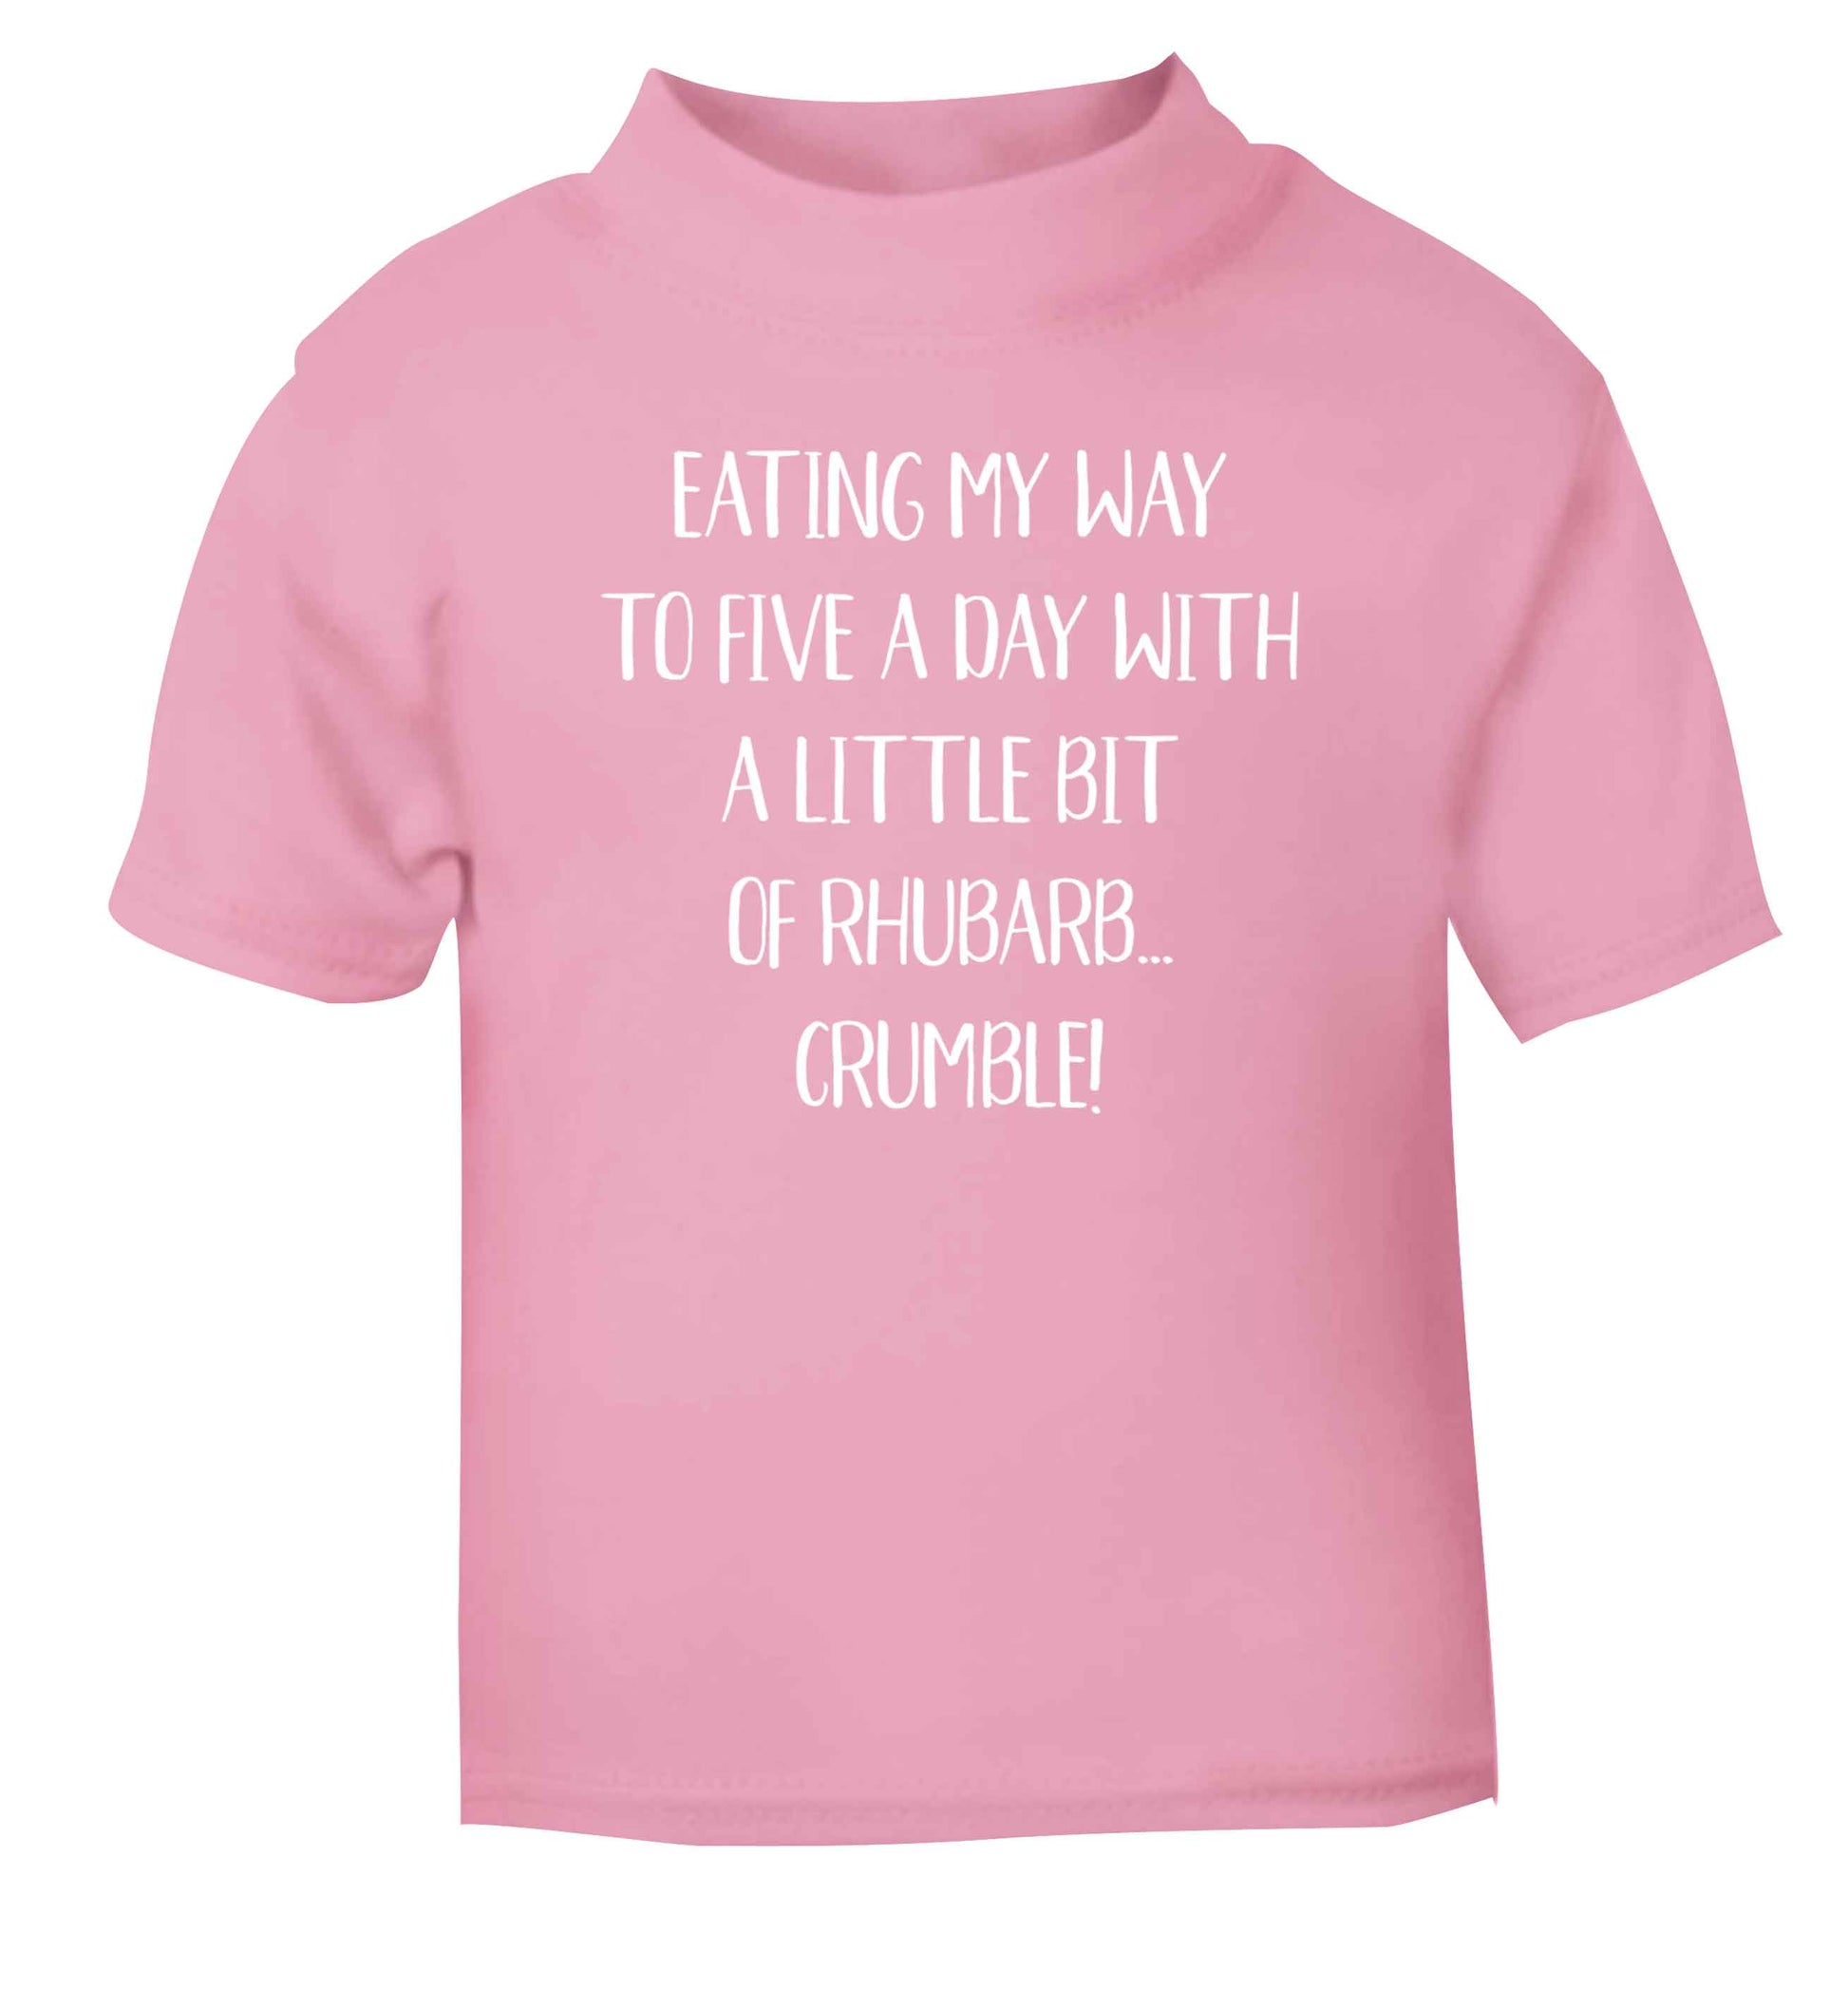 Eating my way to five a day with a little bit of rhubarb crumble light pink Baby Toddler Tshirt 2 Years